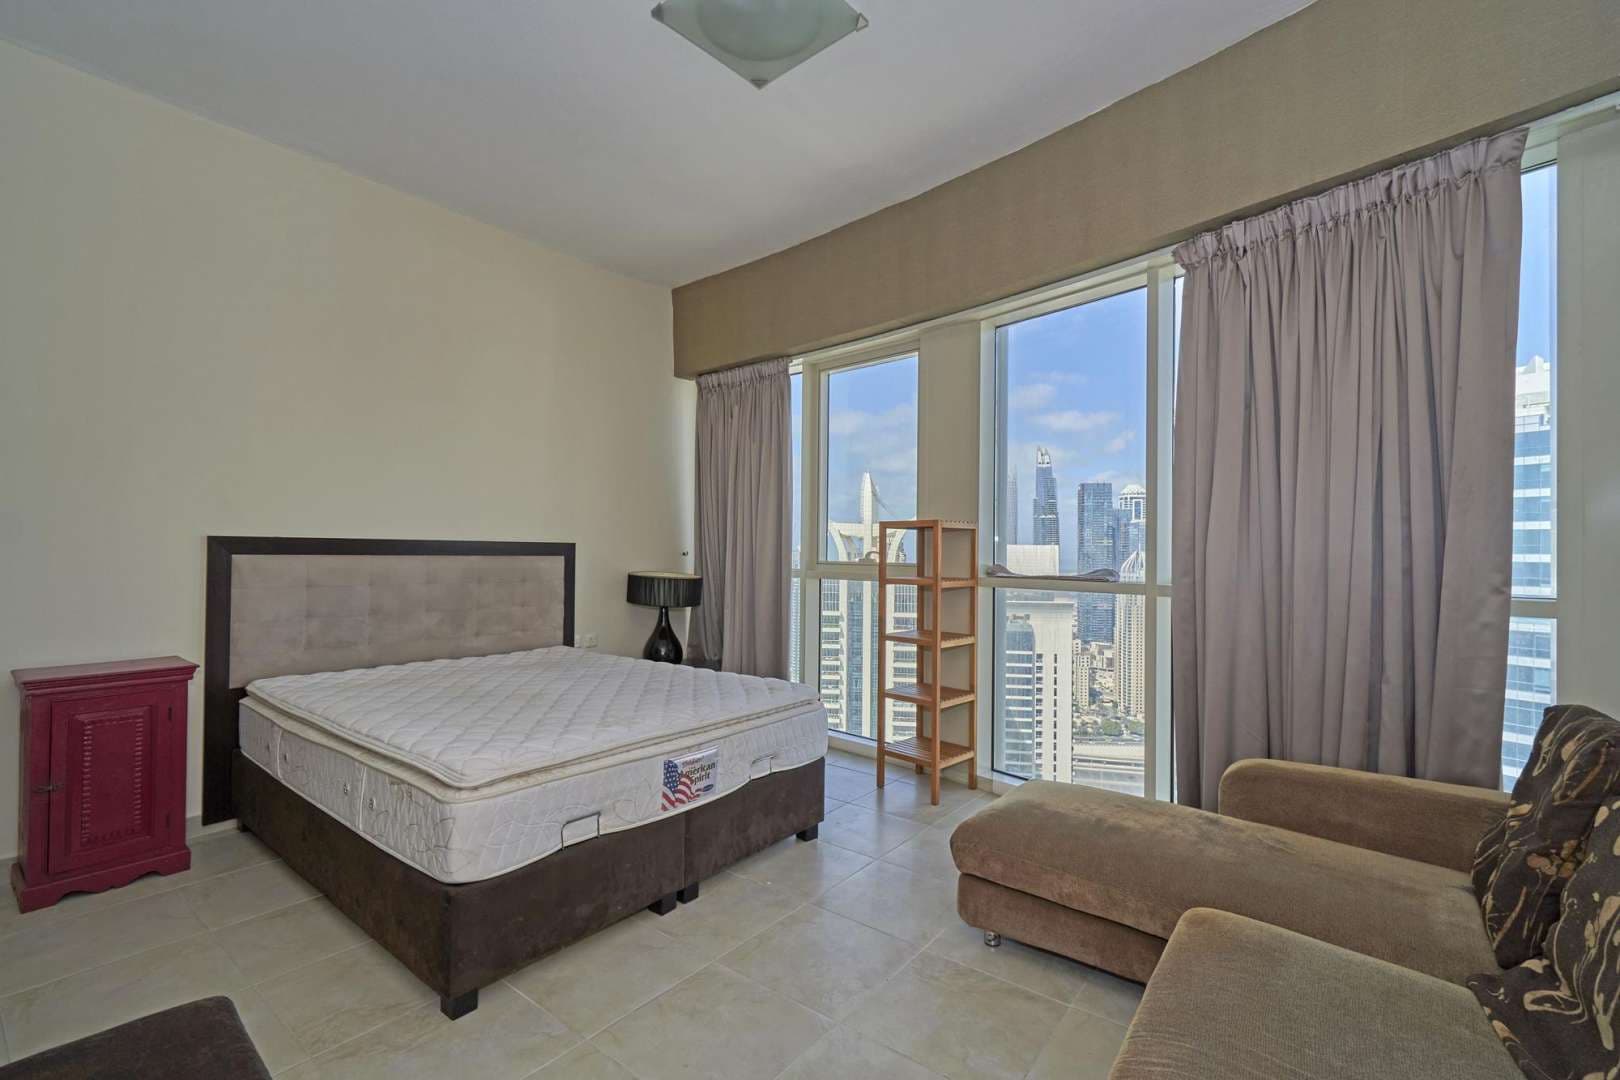 2 Bedroom Apartment For Rent Lake Shore Tower Lp05728 14acc0cd8bd9a200.jpg